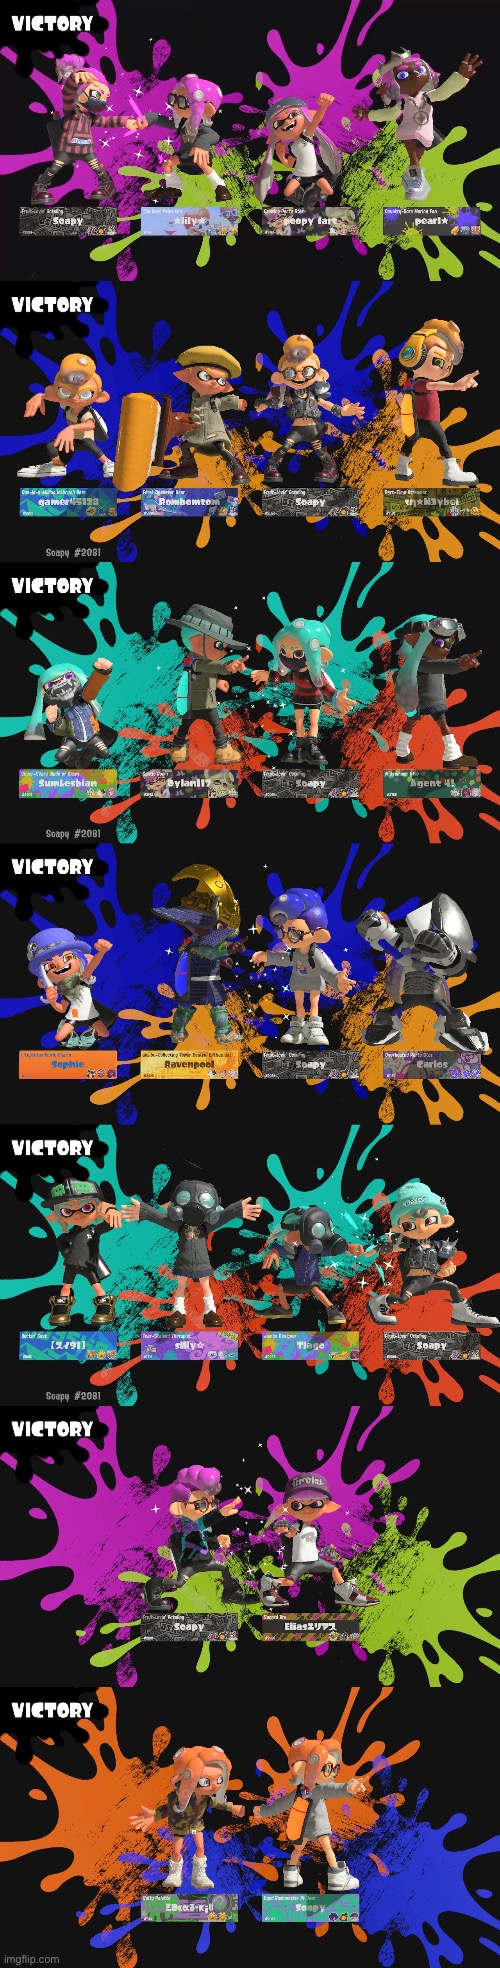 All fist bumps I have images of with friends and regular battles?? | image tagged in splatoon,inkling,octoling,fist bump,splatoon 2 | made w/ Imgflip meme maker